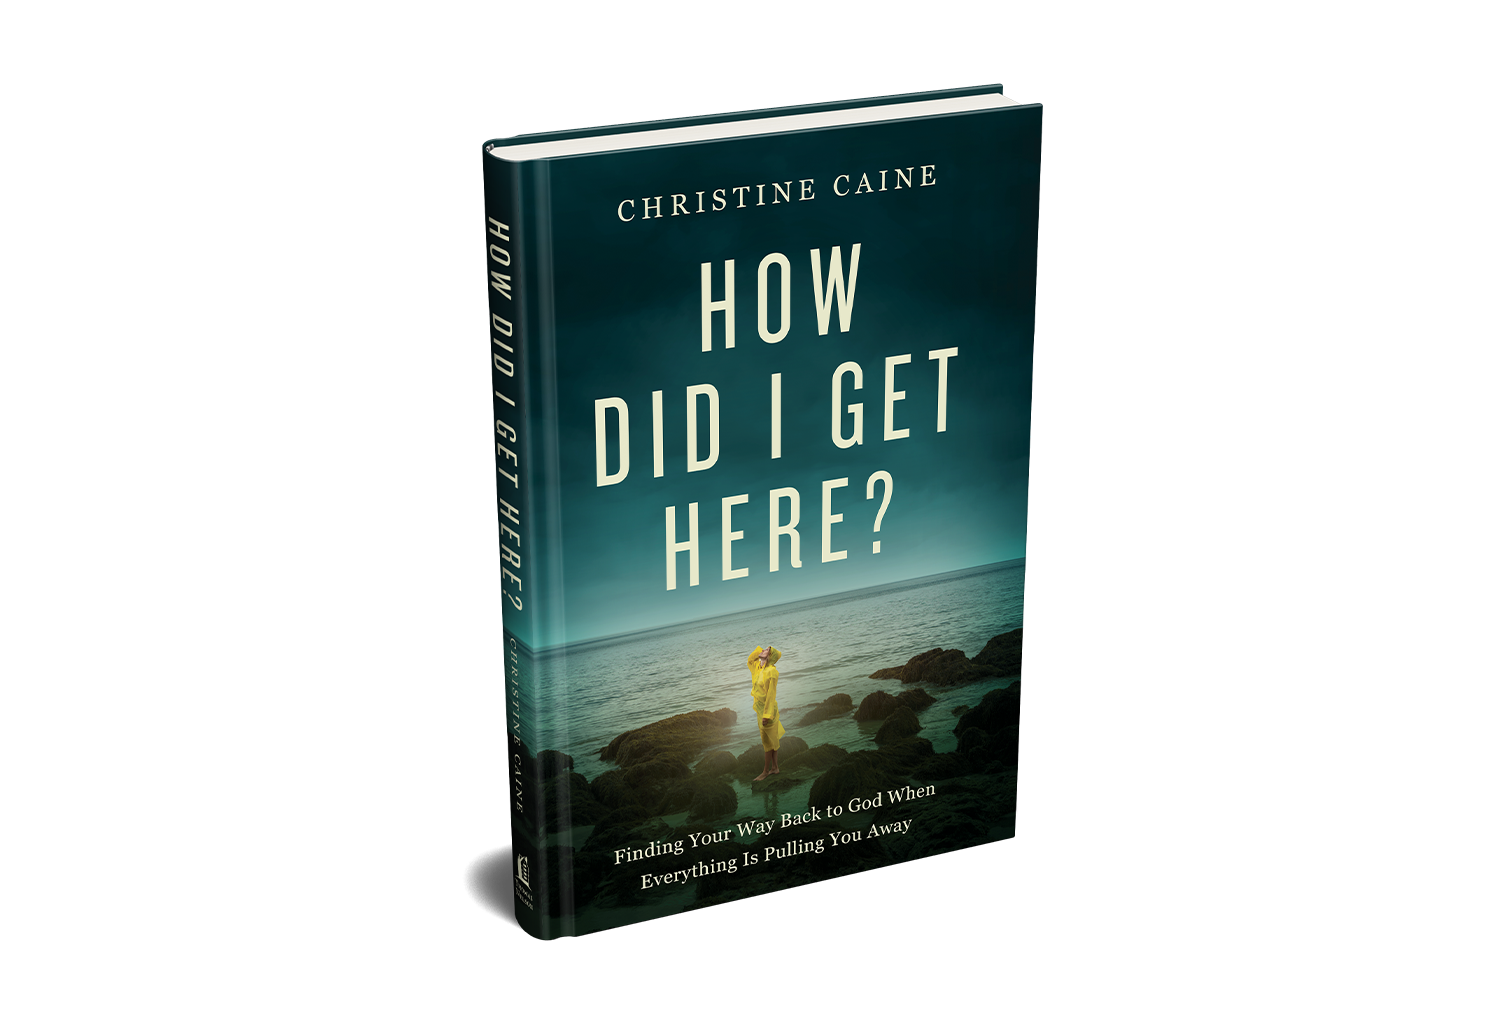 How Did I Get Here? by Christine Caine on TBN